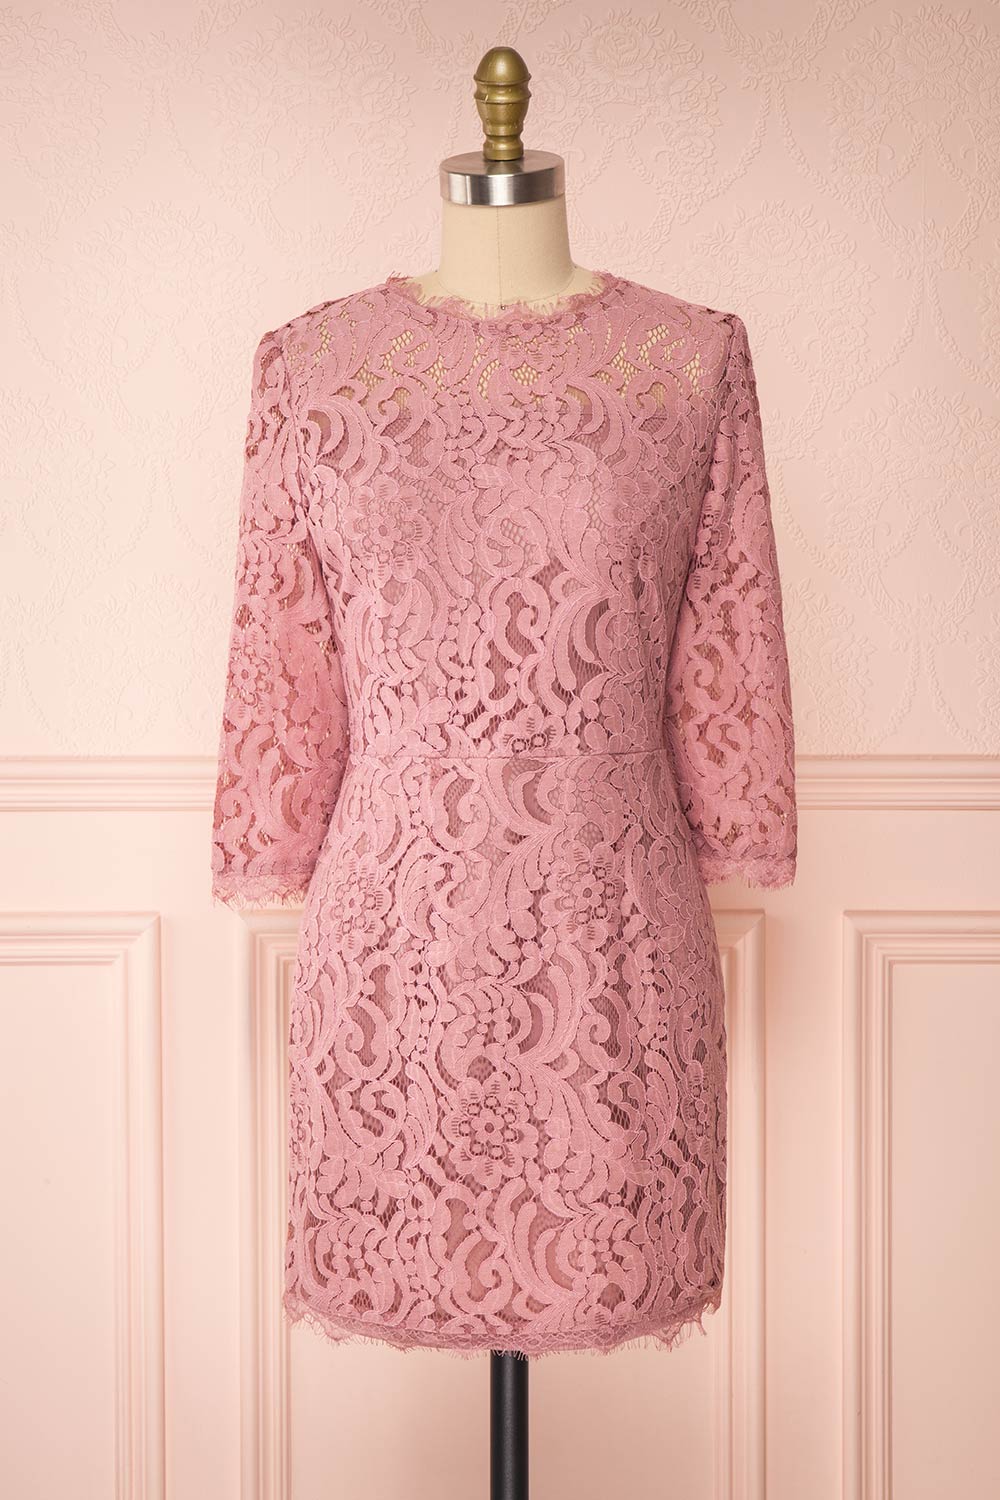 Undine Lilac Short Lace Dress w/ 3/4 Sleeves | Boutique 1861 front view 